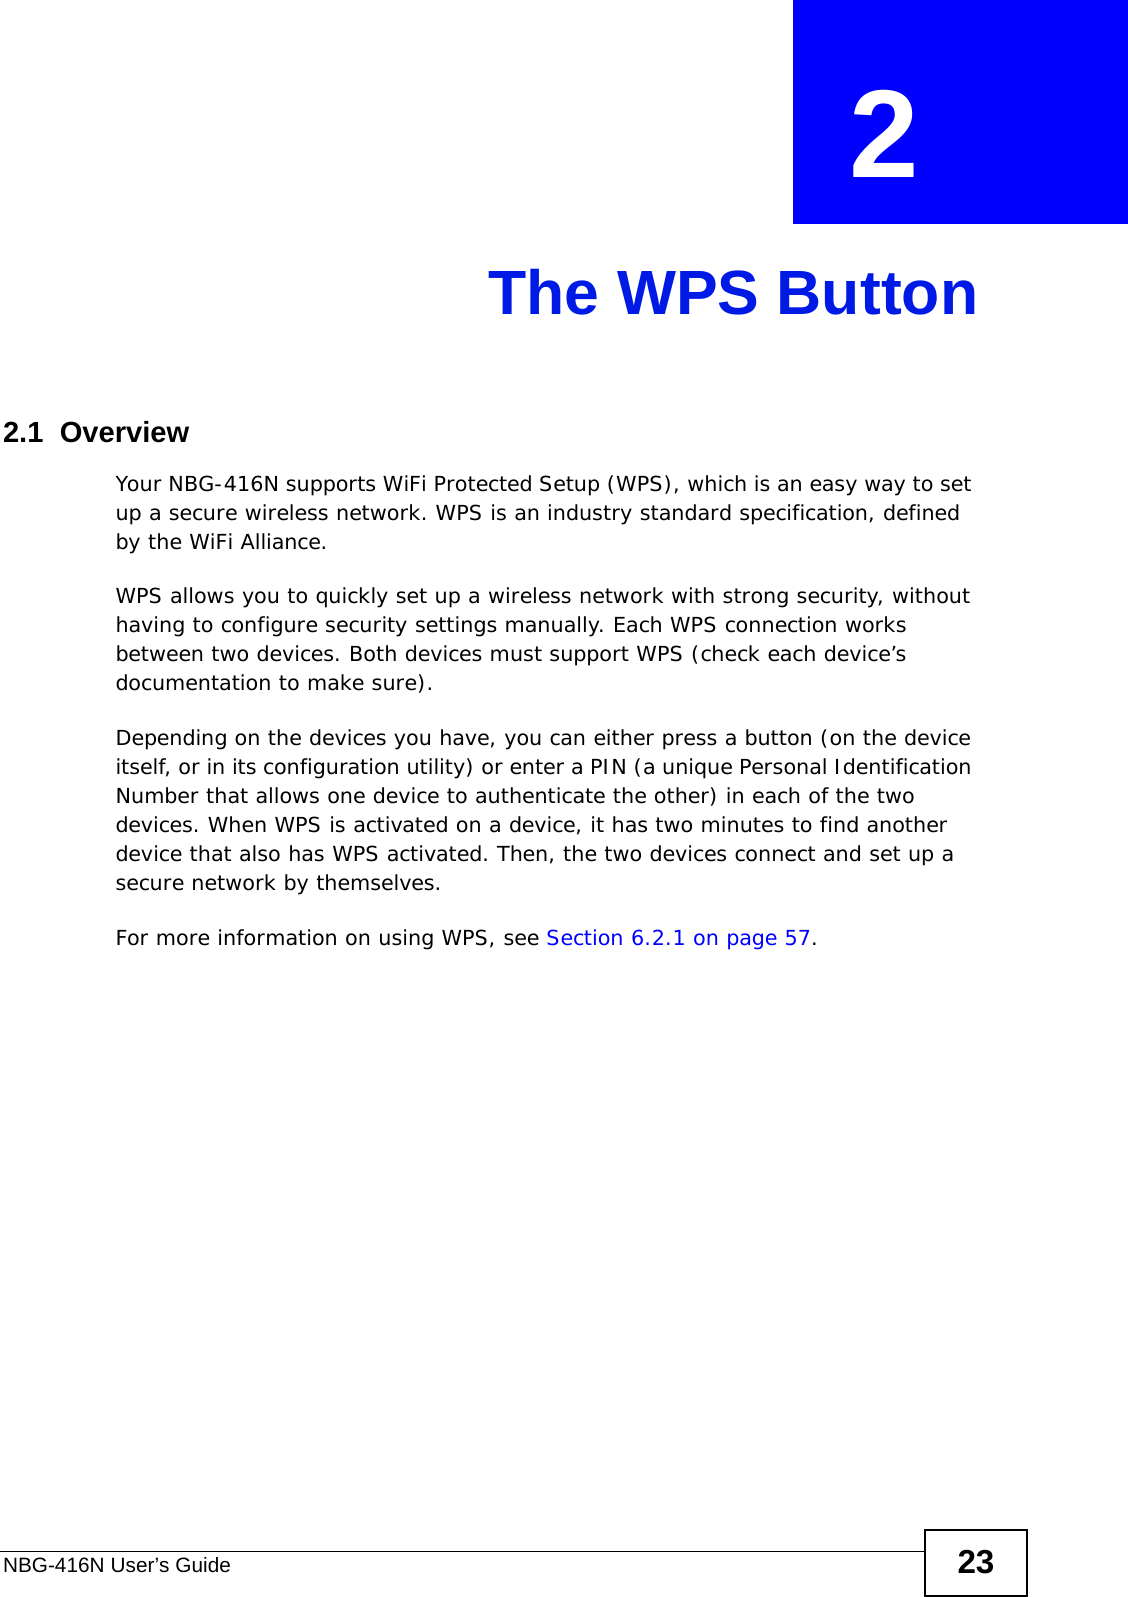 NBG-416N User’s Guide 23CHAPTER  2 The WPS Button2.1  OverviewYour NBG-416N supports WiFi Protected Setup (WPS), which is an easy way to set up a secure wireless network. WPS is an industry standard specification, defined by the WiFi Alliance.WPS allows you to quickly set up a wireless network with strong security, without having to configure security settings manually. Each WPS connection works between two devices. Both devices must support WPS (check each device’s documentation to make sure). Depending on the devices you have, you can either press a button (on the device itself, or in its configuration utility) or enter a PIN (a unique Personal Identification Number that allows one device to authenticate the other) in each of the two devices. When WPS is activated on a device, it has two minutes to find another device that also has WPS activated. Then, the two devices connect and set up a secure network by themselves.For more information on using WPS, see Section 6.2.1 on page 57.